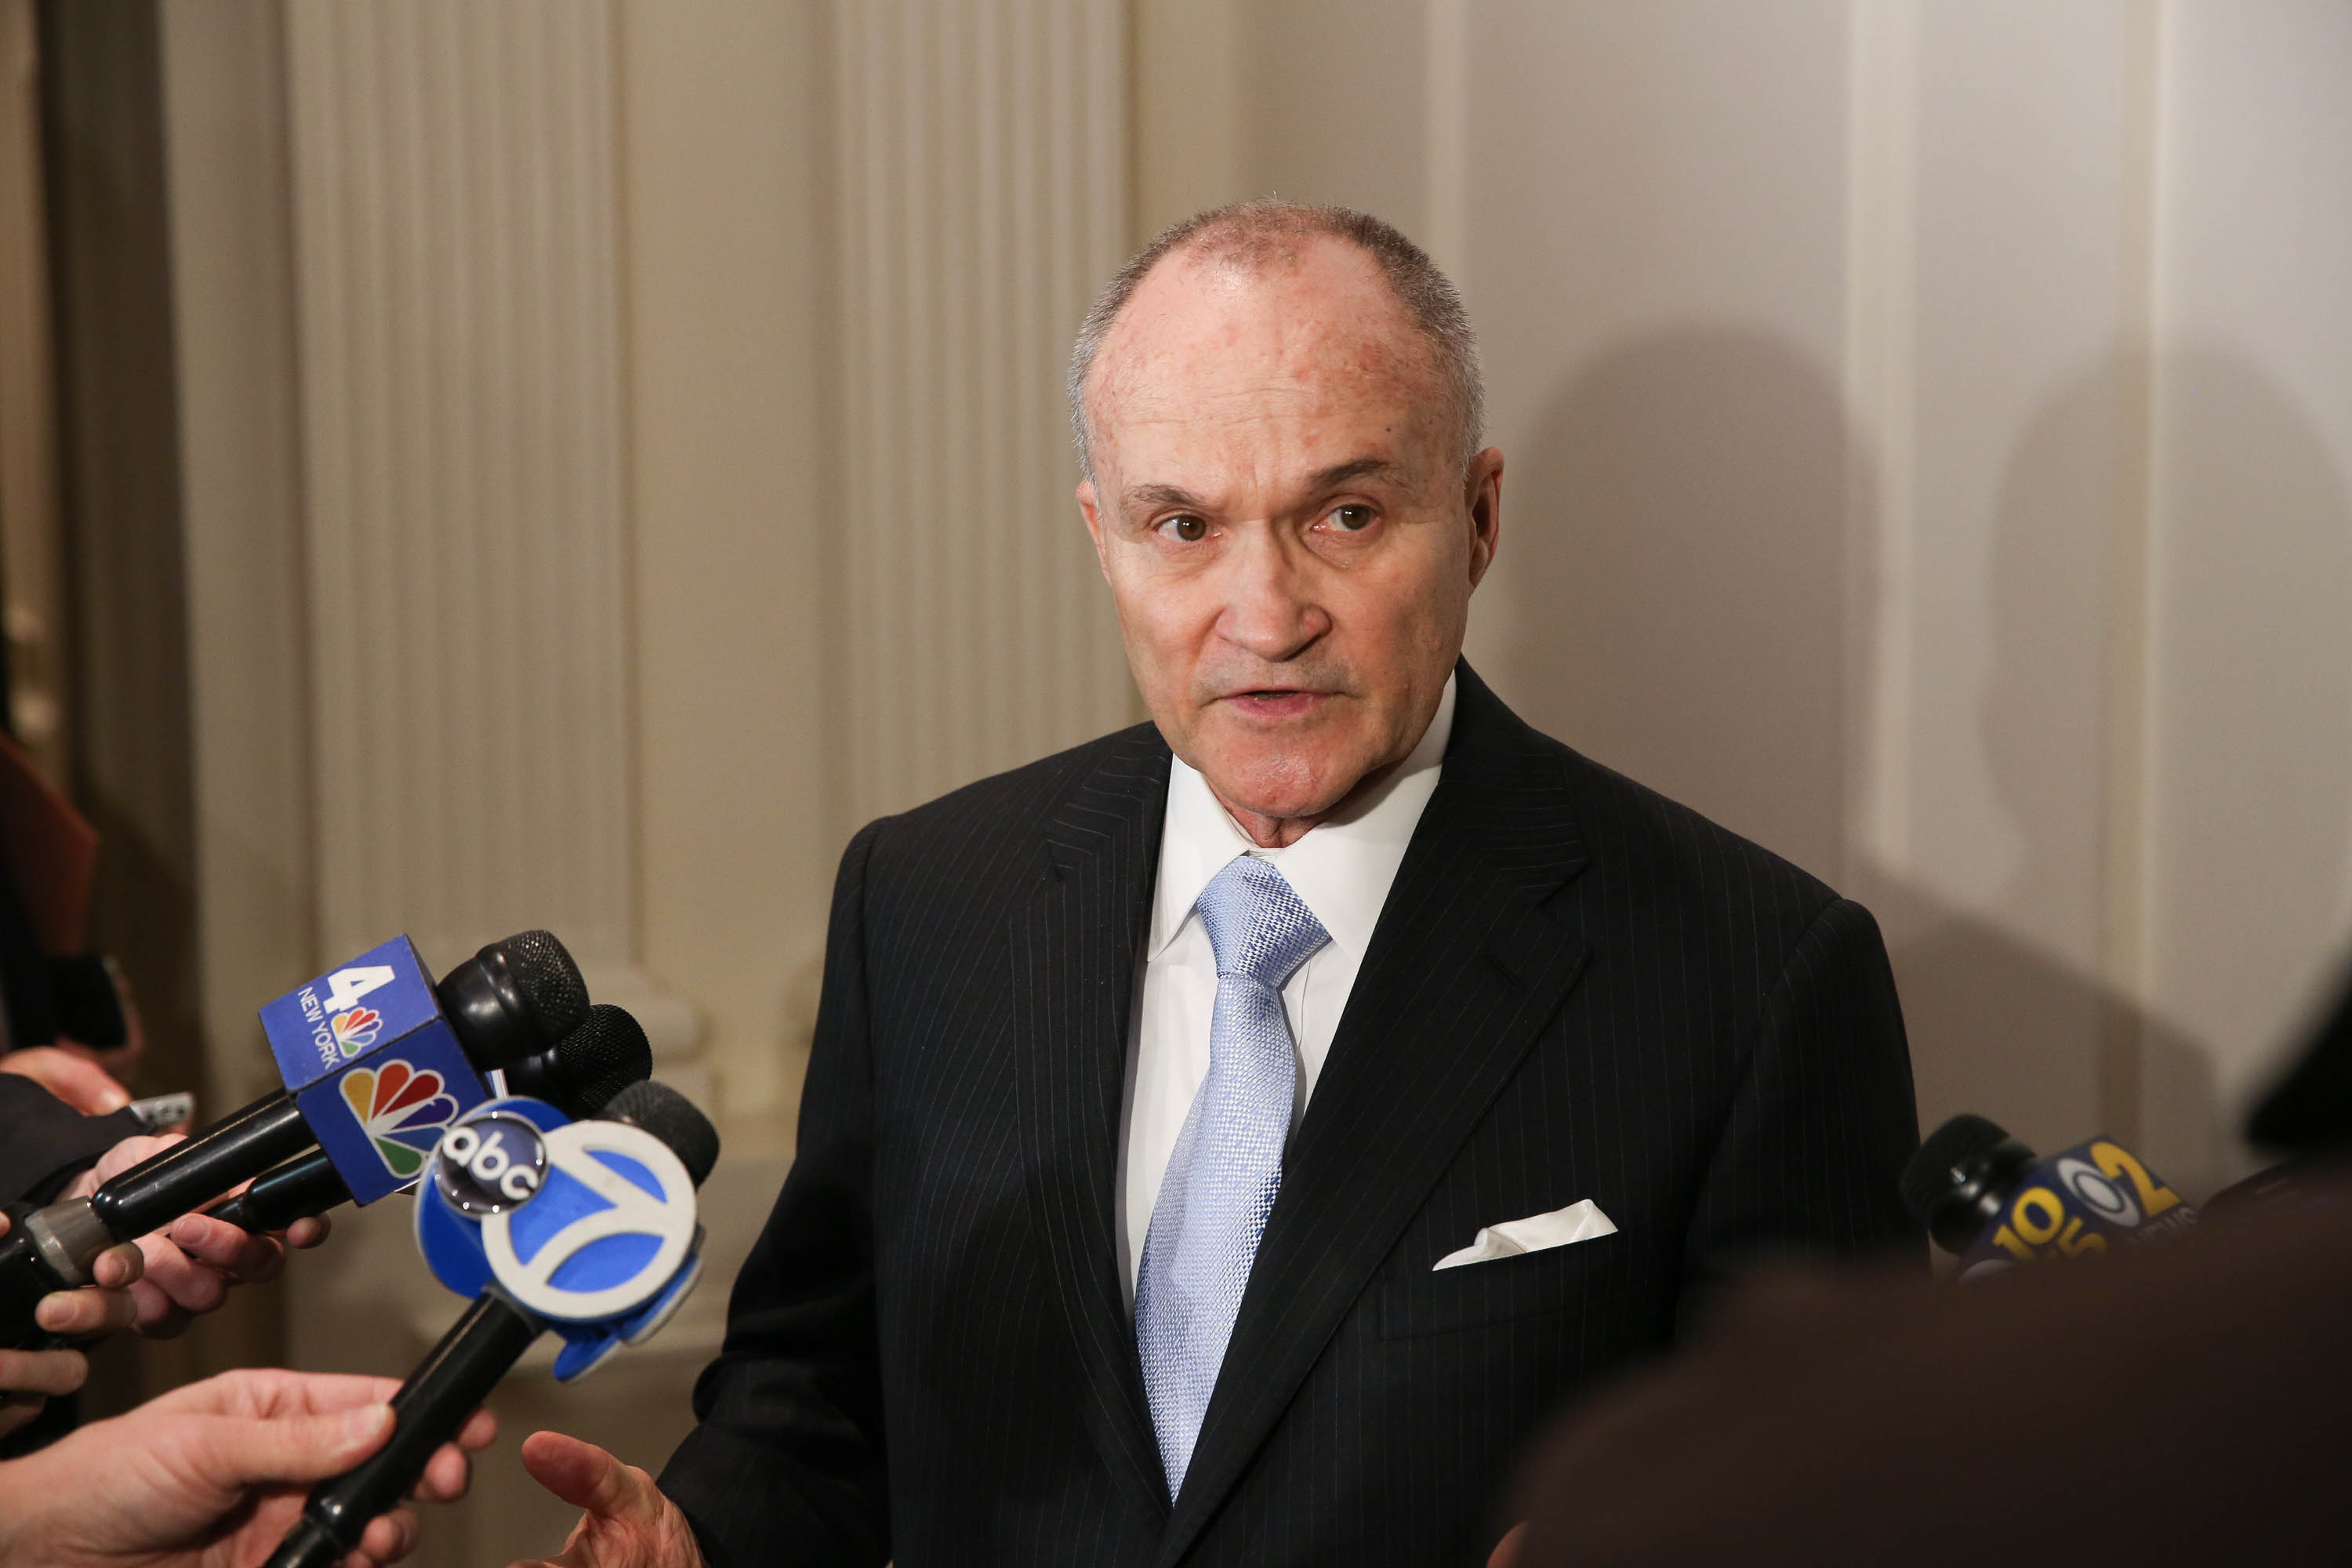 Raymond "Ray" Kelly attends Police Athletic League's 25th Annual Women of the Year Luncheon at The Plaza Hotel on December 11, 2013 in New York City.  (Rob Kim--Getty Images) (Rob Kim&amp;mdash;Getty Images)